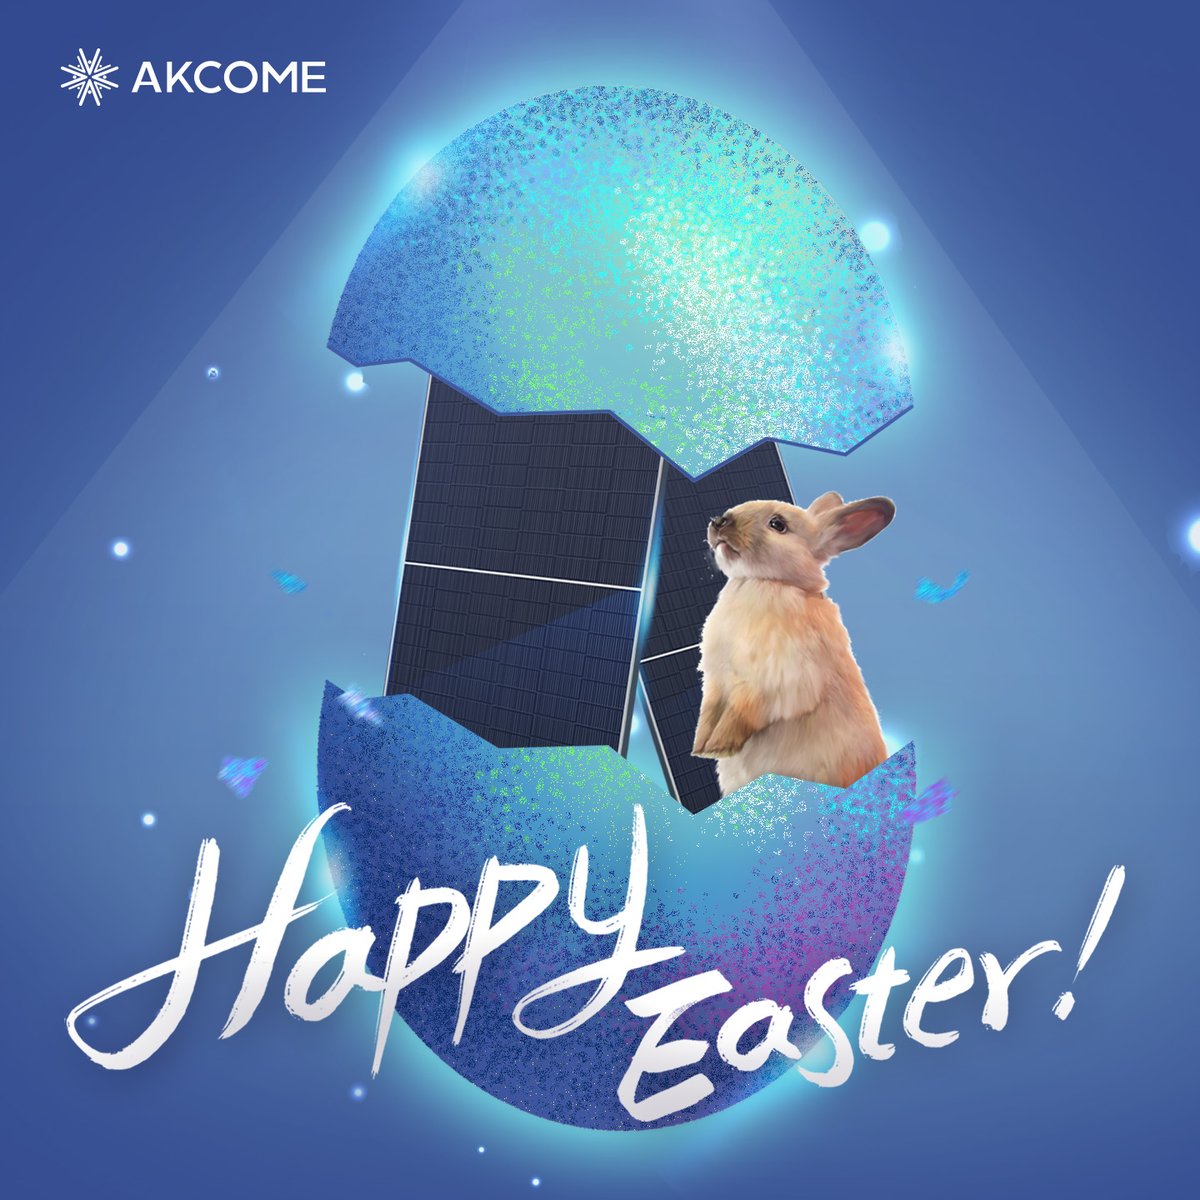 🐰 🐣 Happy Easter, ＃AKCOME's friends! With ＃Easter approaching, let's embrace the spirit of renewal and hope. Let's share joy with those around us and cherish moments with loved ones. May this ＃Easter season be filled with ＃love, laughter, and memorable ＃celebrations! 🌸 🌷